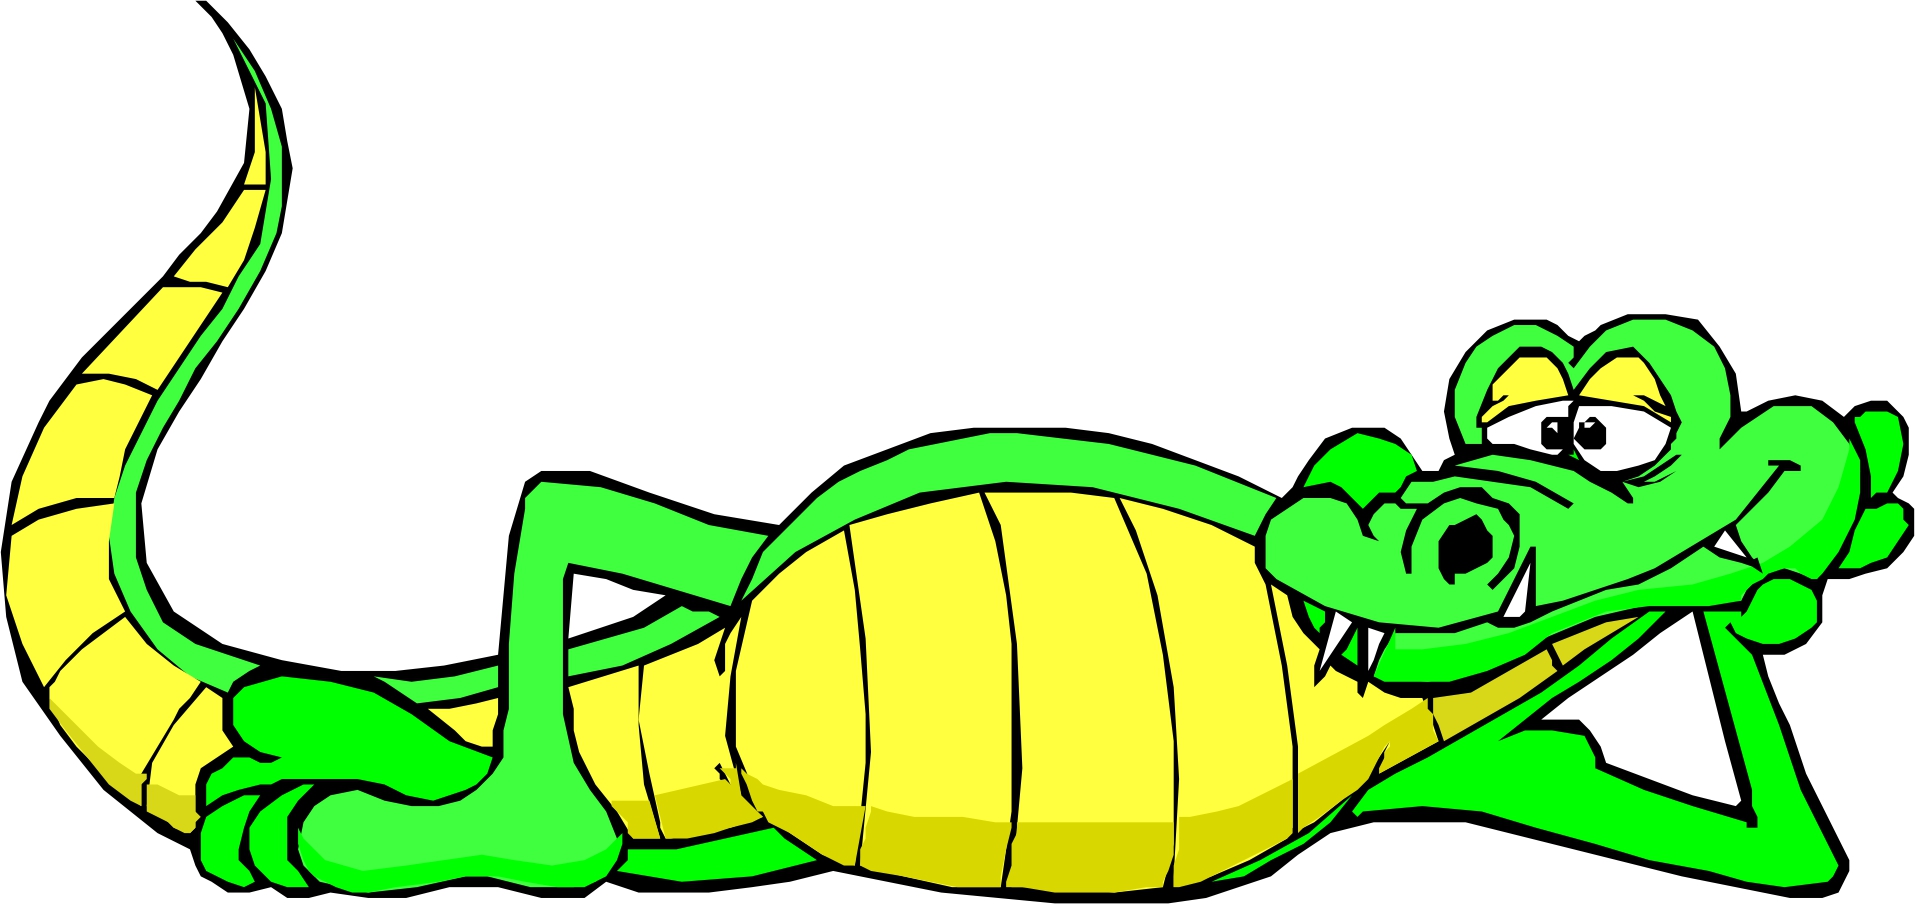 Free Alligator Image Clipart Clipart